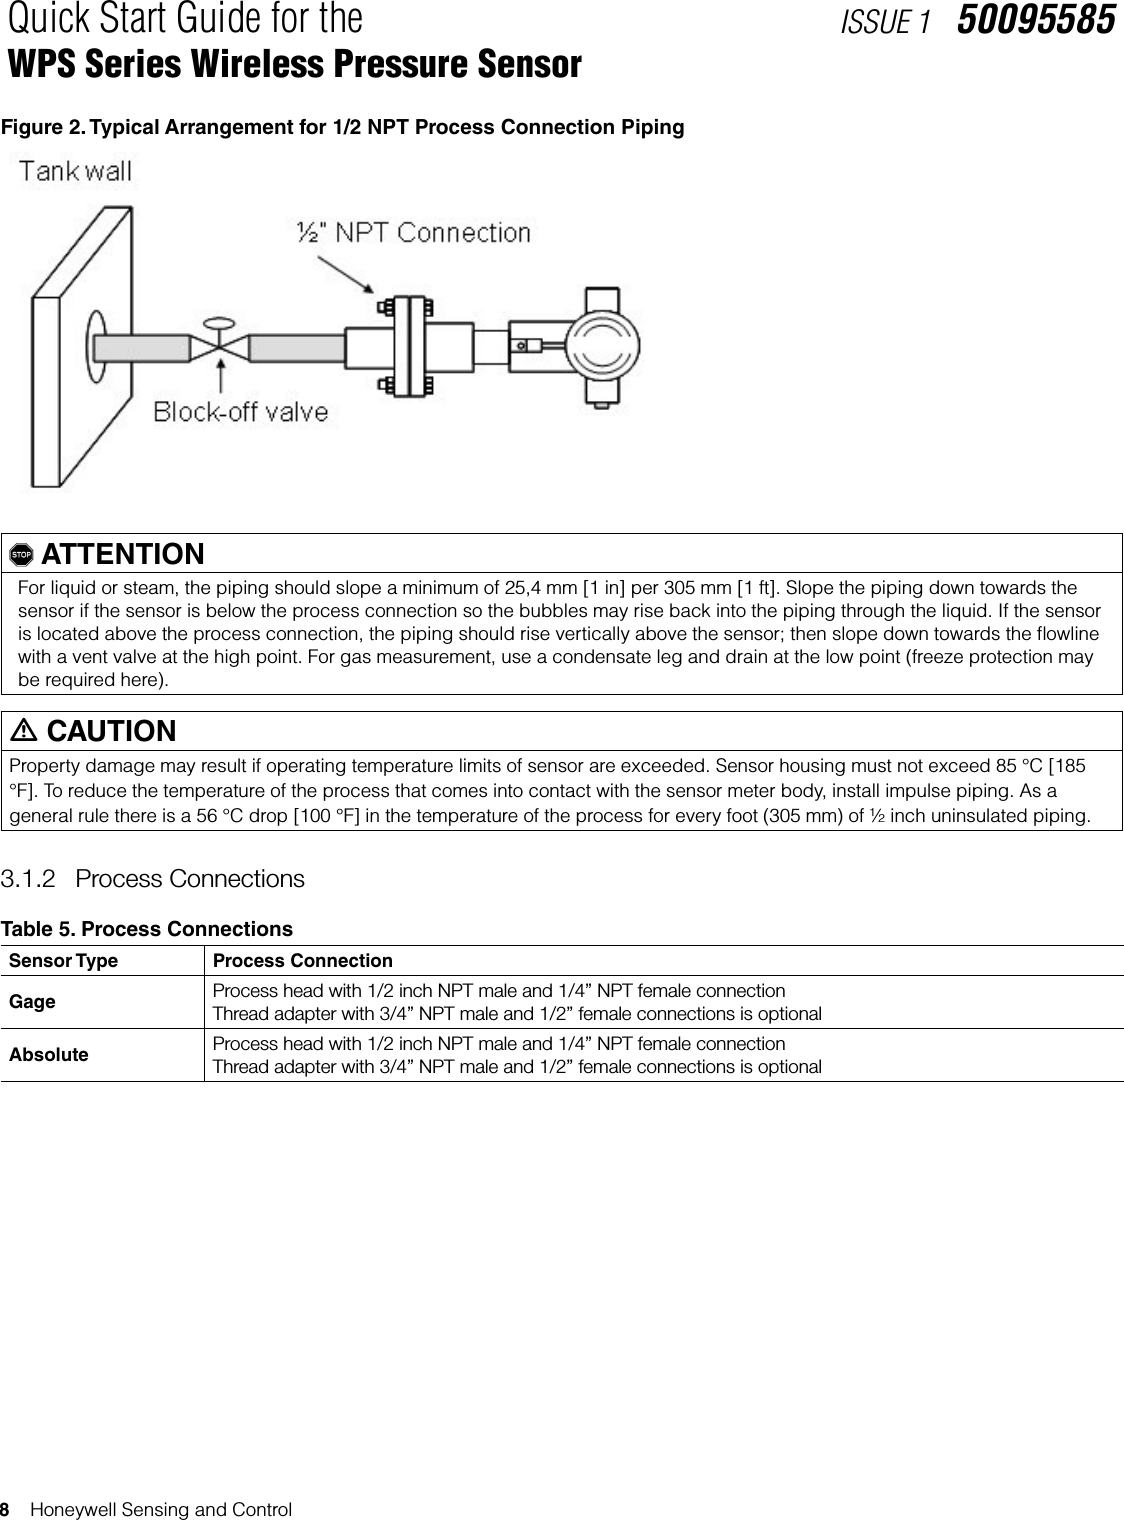 8    Honeywell Sensing and ControlQuick Start Guide for theWPS Series Wireless Pressure SensorISSUE 1   50095585Figure 2. Typical Arrangement for 1/2 NPT Process Connection Piping, ATTENTIONFor liquid or steam, the piping should slope a minimum of 25,4 mm [1 in] per 305 mm [1 ft]. Slope the piping down towards the sensor if the sensor is below the process connection so the bubbles may rise back into the piping through the liquid. If the sensor is located above the process connection, the piping should rise vertically above the sensor; then slope down towards the ﬂowline with a vent valve at the high point. For gas measurement, use a condensate leg and drain at the low point (freeze protection may be required here).m CAUTIONProperty damage may result if operating temperature limits of sensor are exceeded. Sensor housing must not exceed 85 °C [185 °F]. To reduce the temperature of the process that comes into contact with the sensor meter body, install impulse piping. As a general rule there is a 56 °C drop [100 °F] in the temperature of the process for every foot (305 mm) of ½ inch uninsulated piping.3.1.2  Process ConnectionsTable 5. Process ConnectionsSensor Type Process ConnectionGage Process head with 1/2 inch NPT male and 1/4” NPT female connectionThread adapter with 3/4” NPT male and 1/2” female connections is optionalAbsolute Process head with 1/2 inch NPT male and 1/4” NPT female connectionThread adapter with 3/4” NPT male and 1/2” female connections is optional 